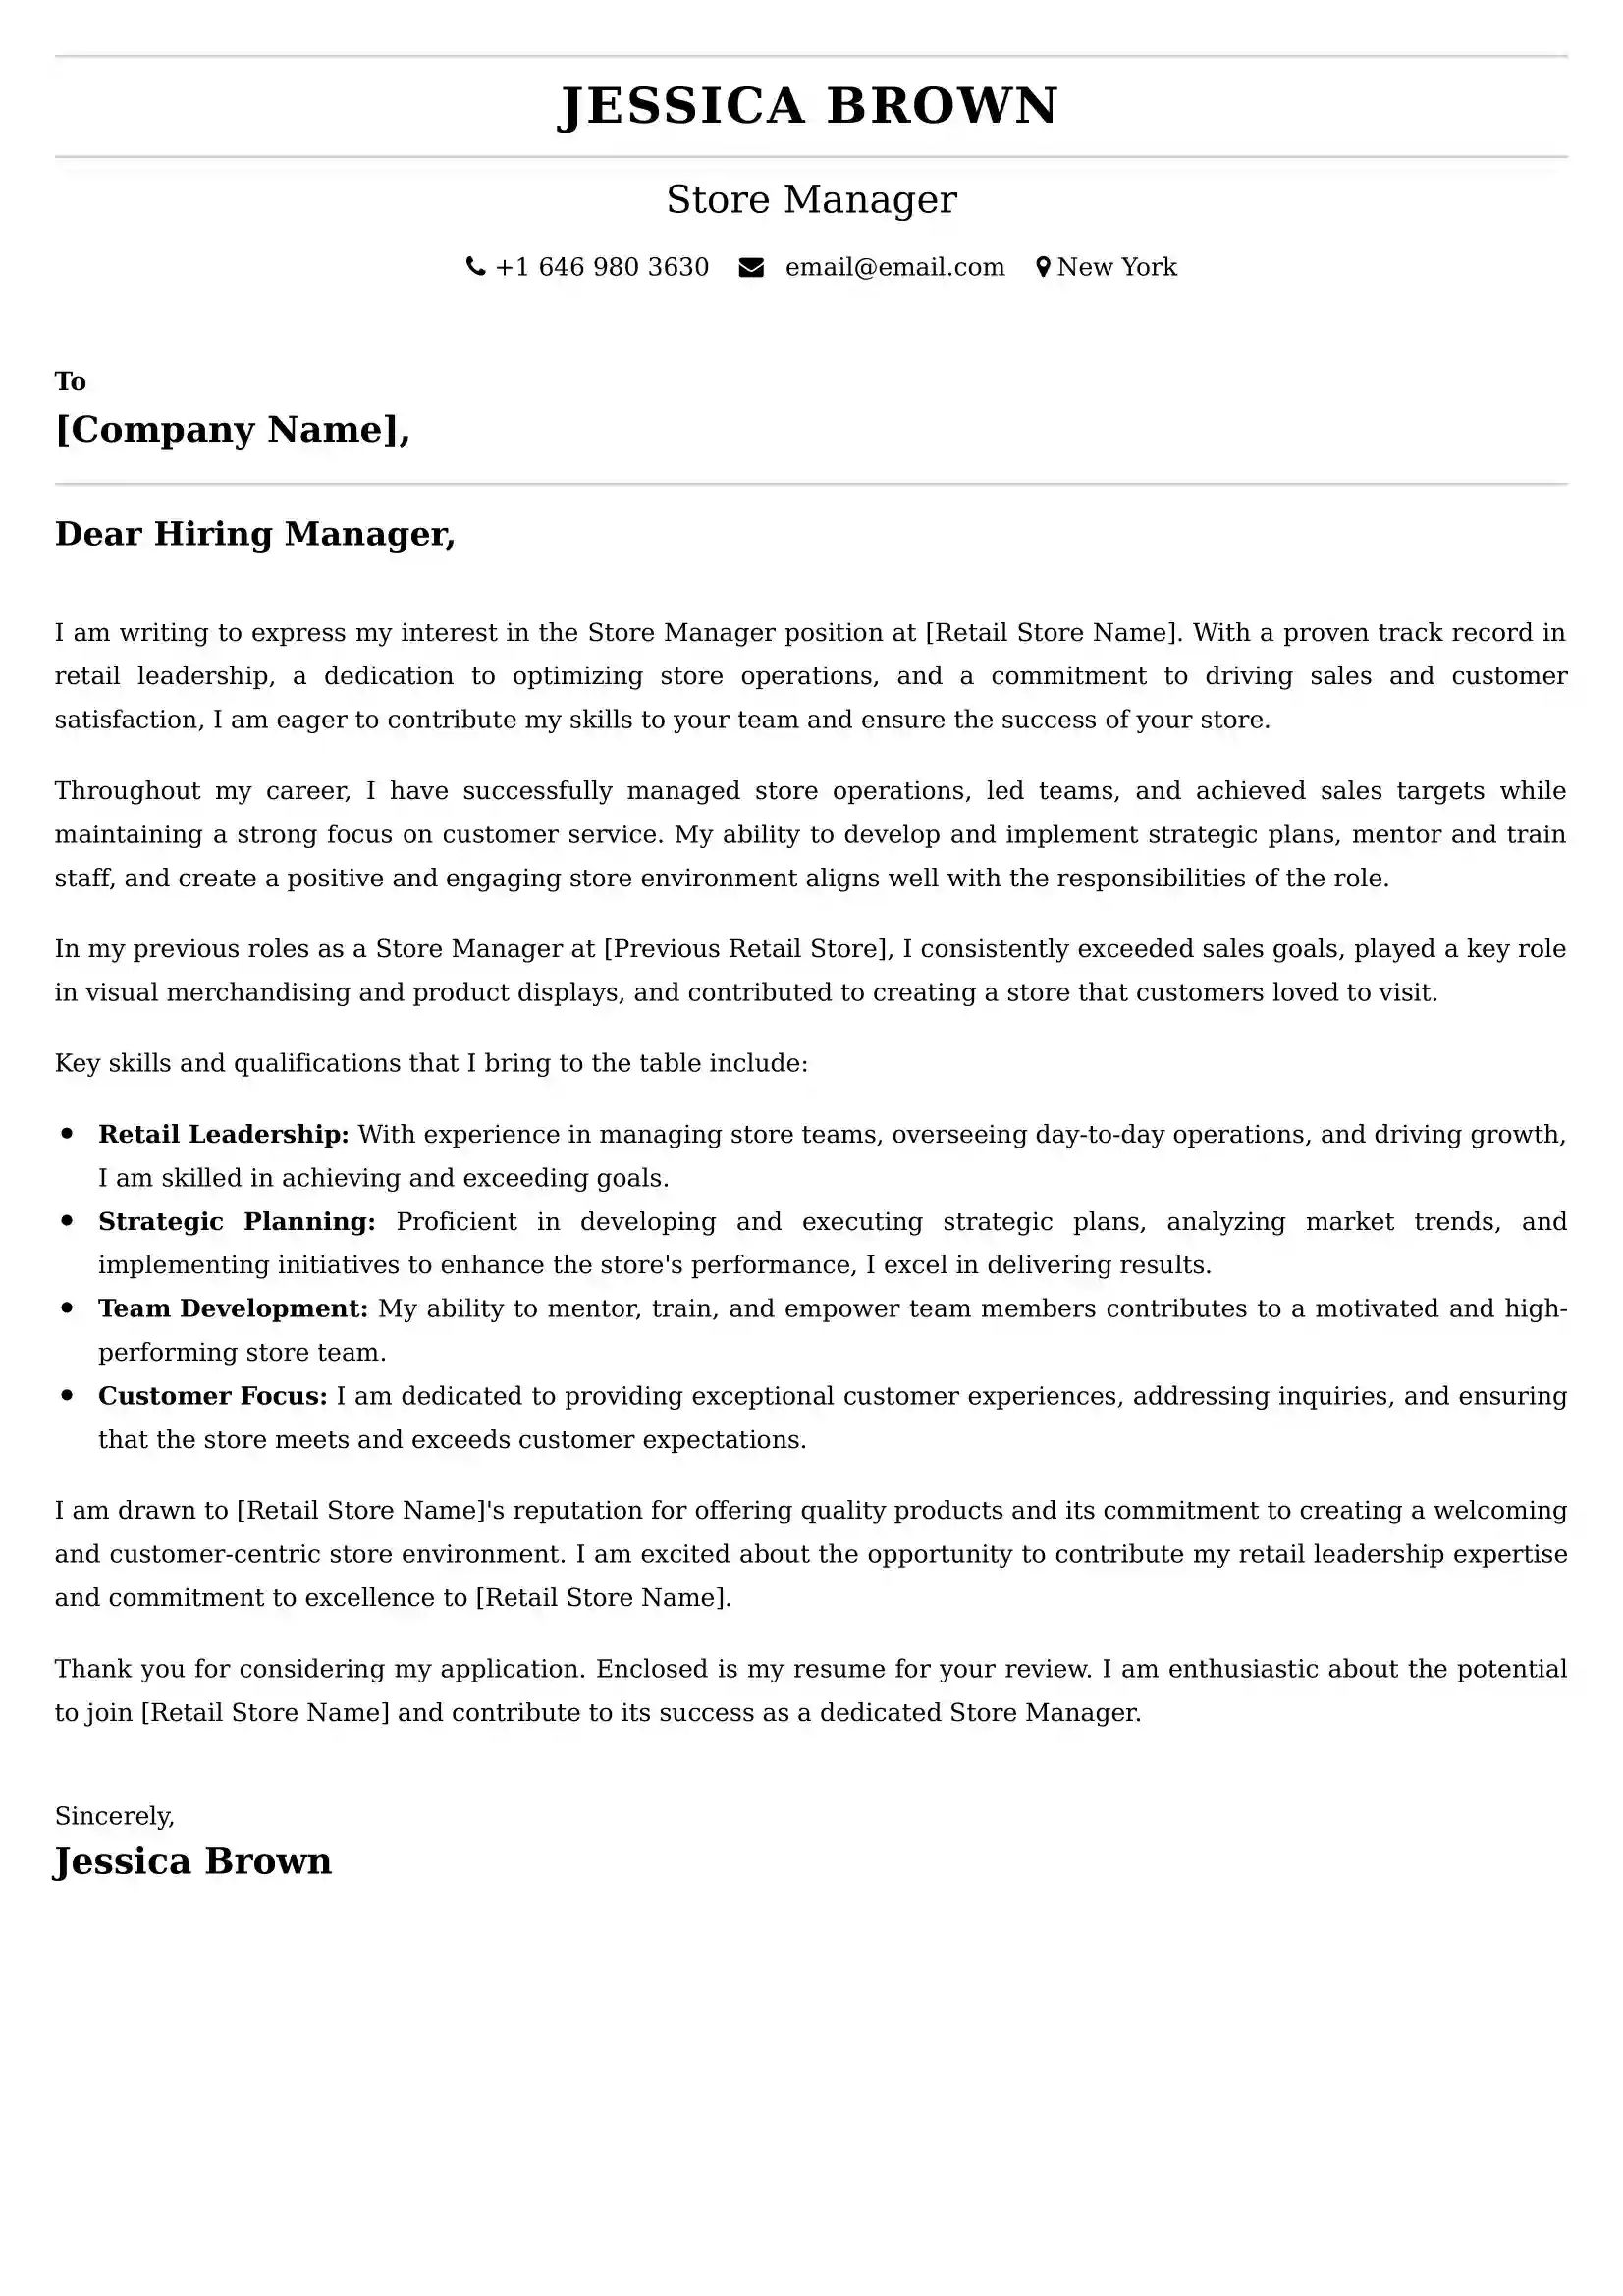 Store Manager Cover Letter Examples UK - Tips and Guide